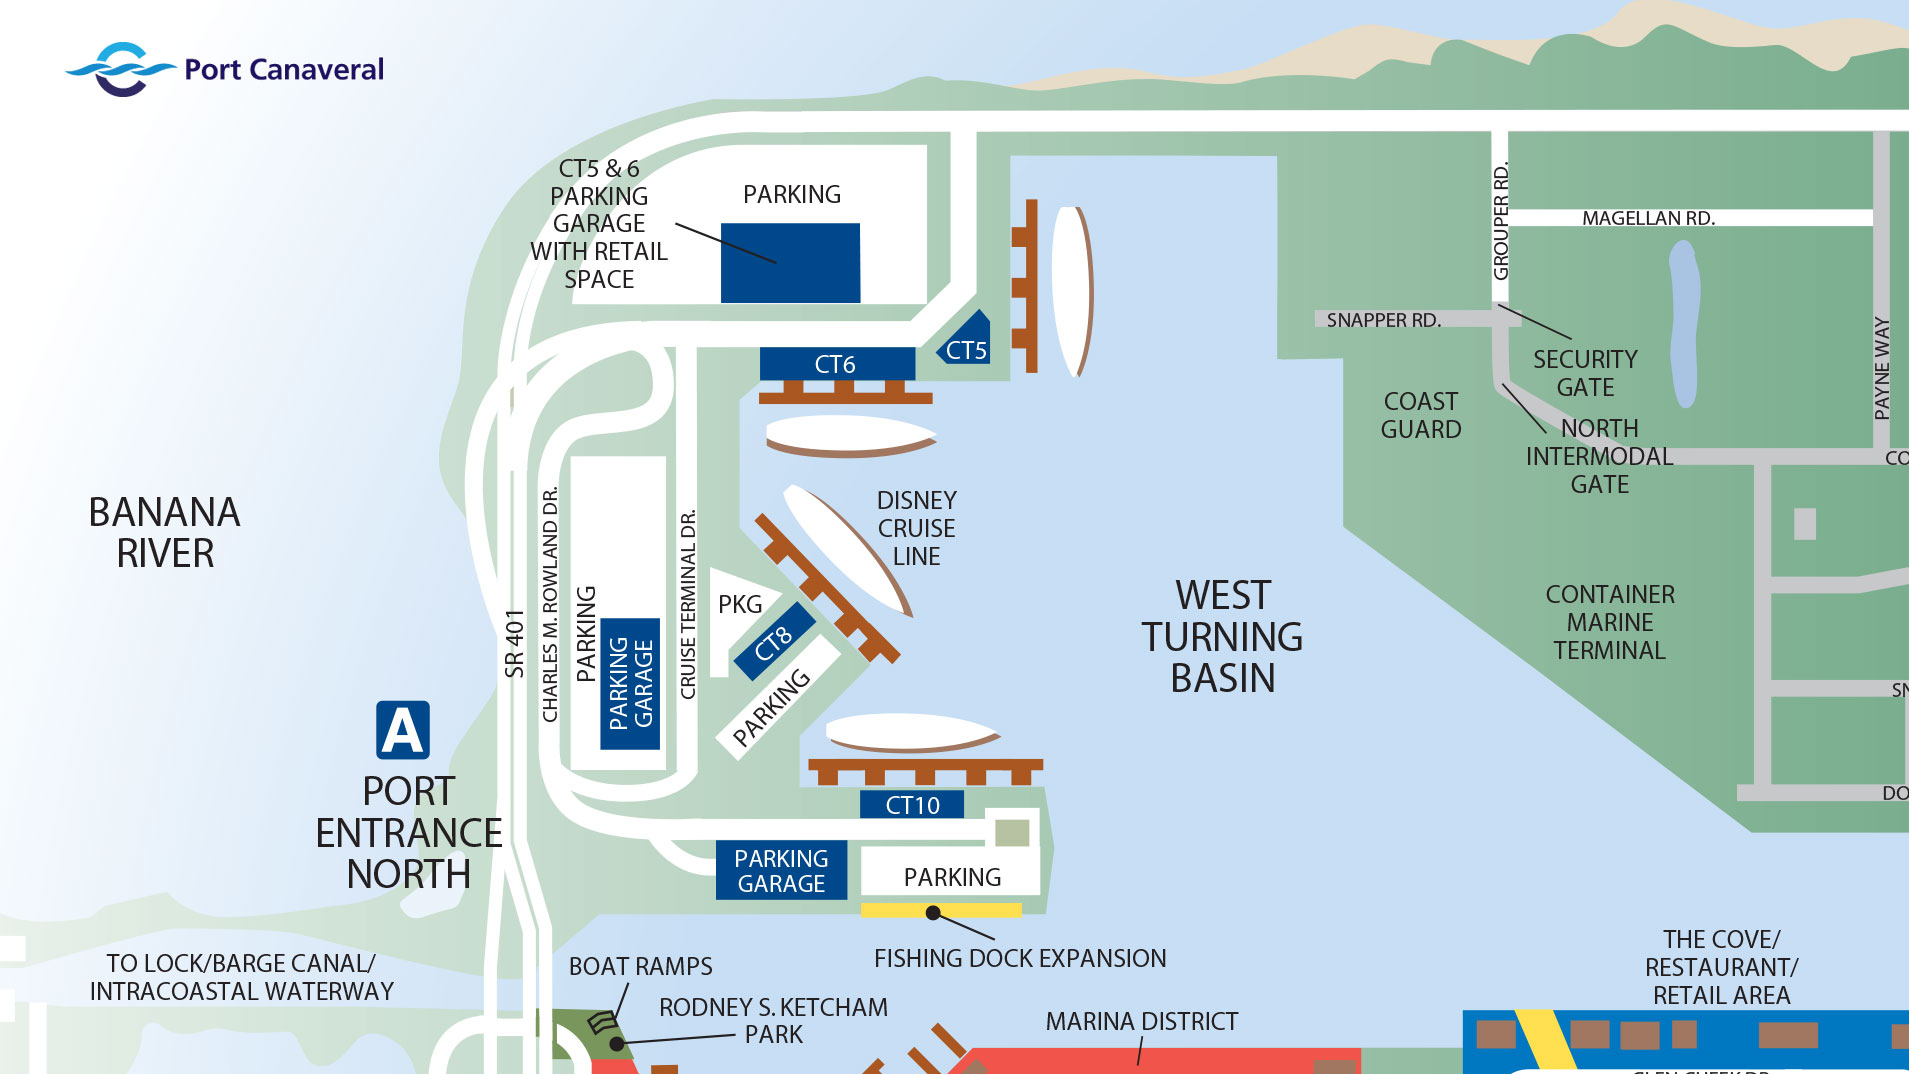 Port Canaveral North Cruise Terminals